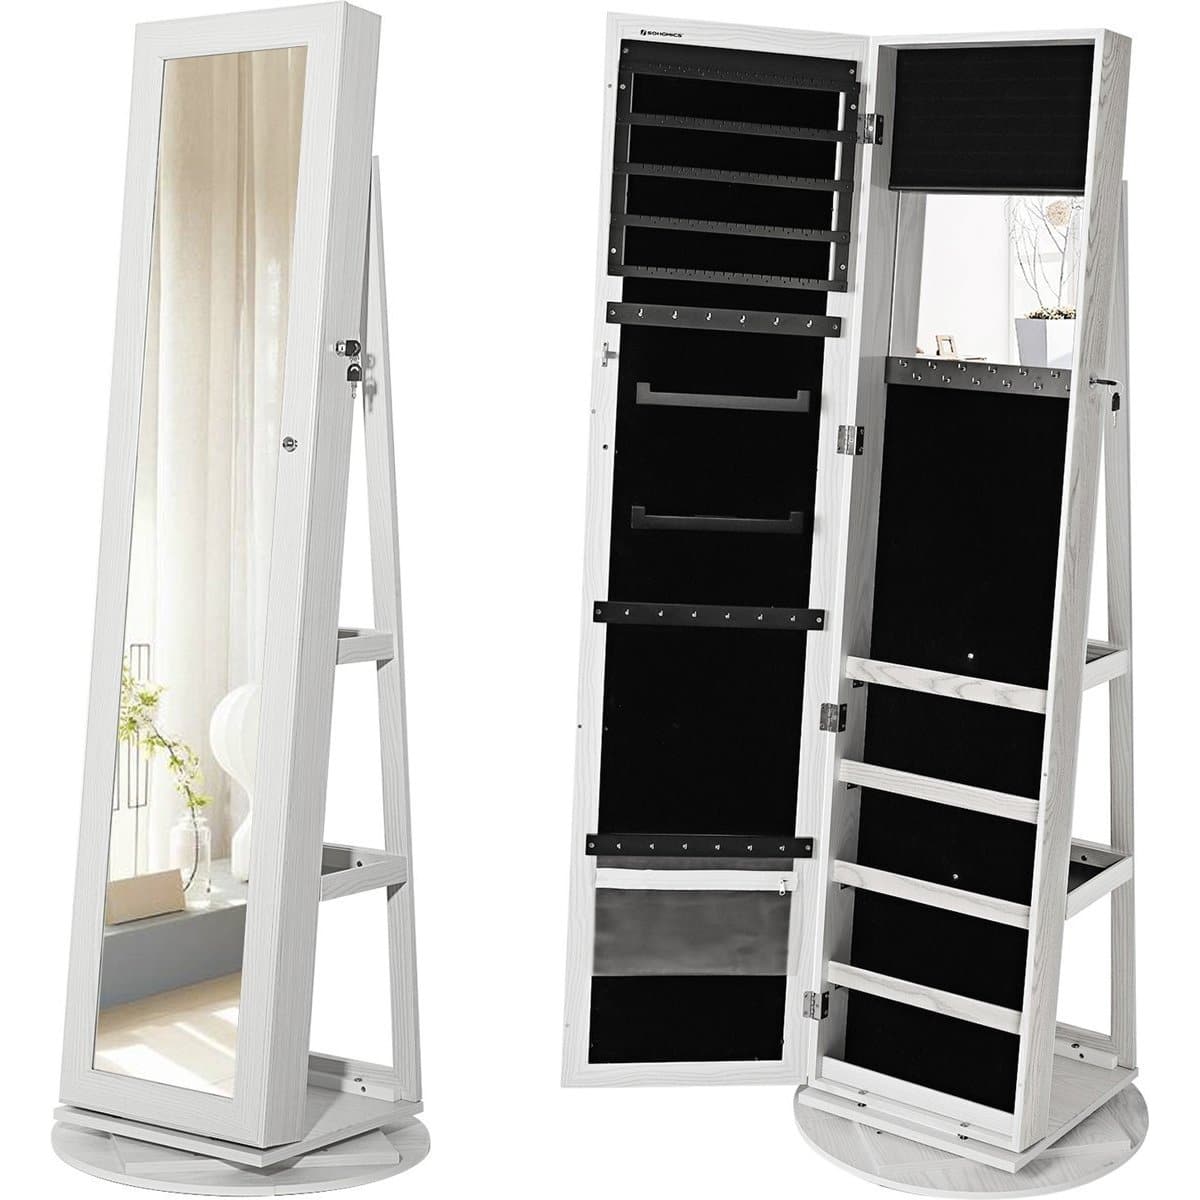 Nancy's Panorama City Jewelry Cabinet With Mirror - Jewelry Cabinet - Jewelry Cabinet - Mirror Cabinet